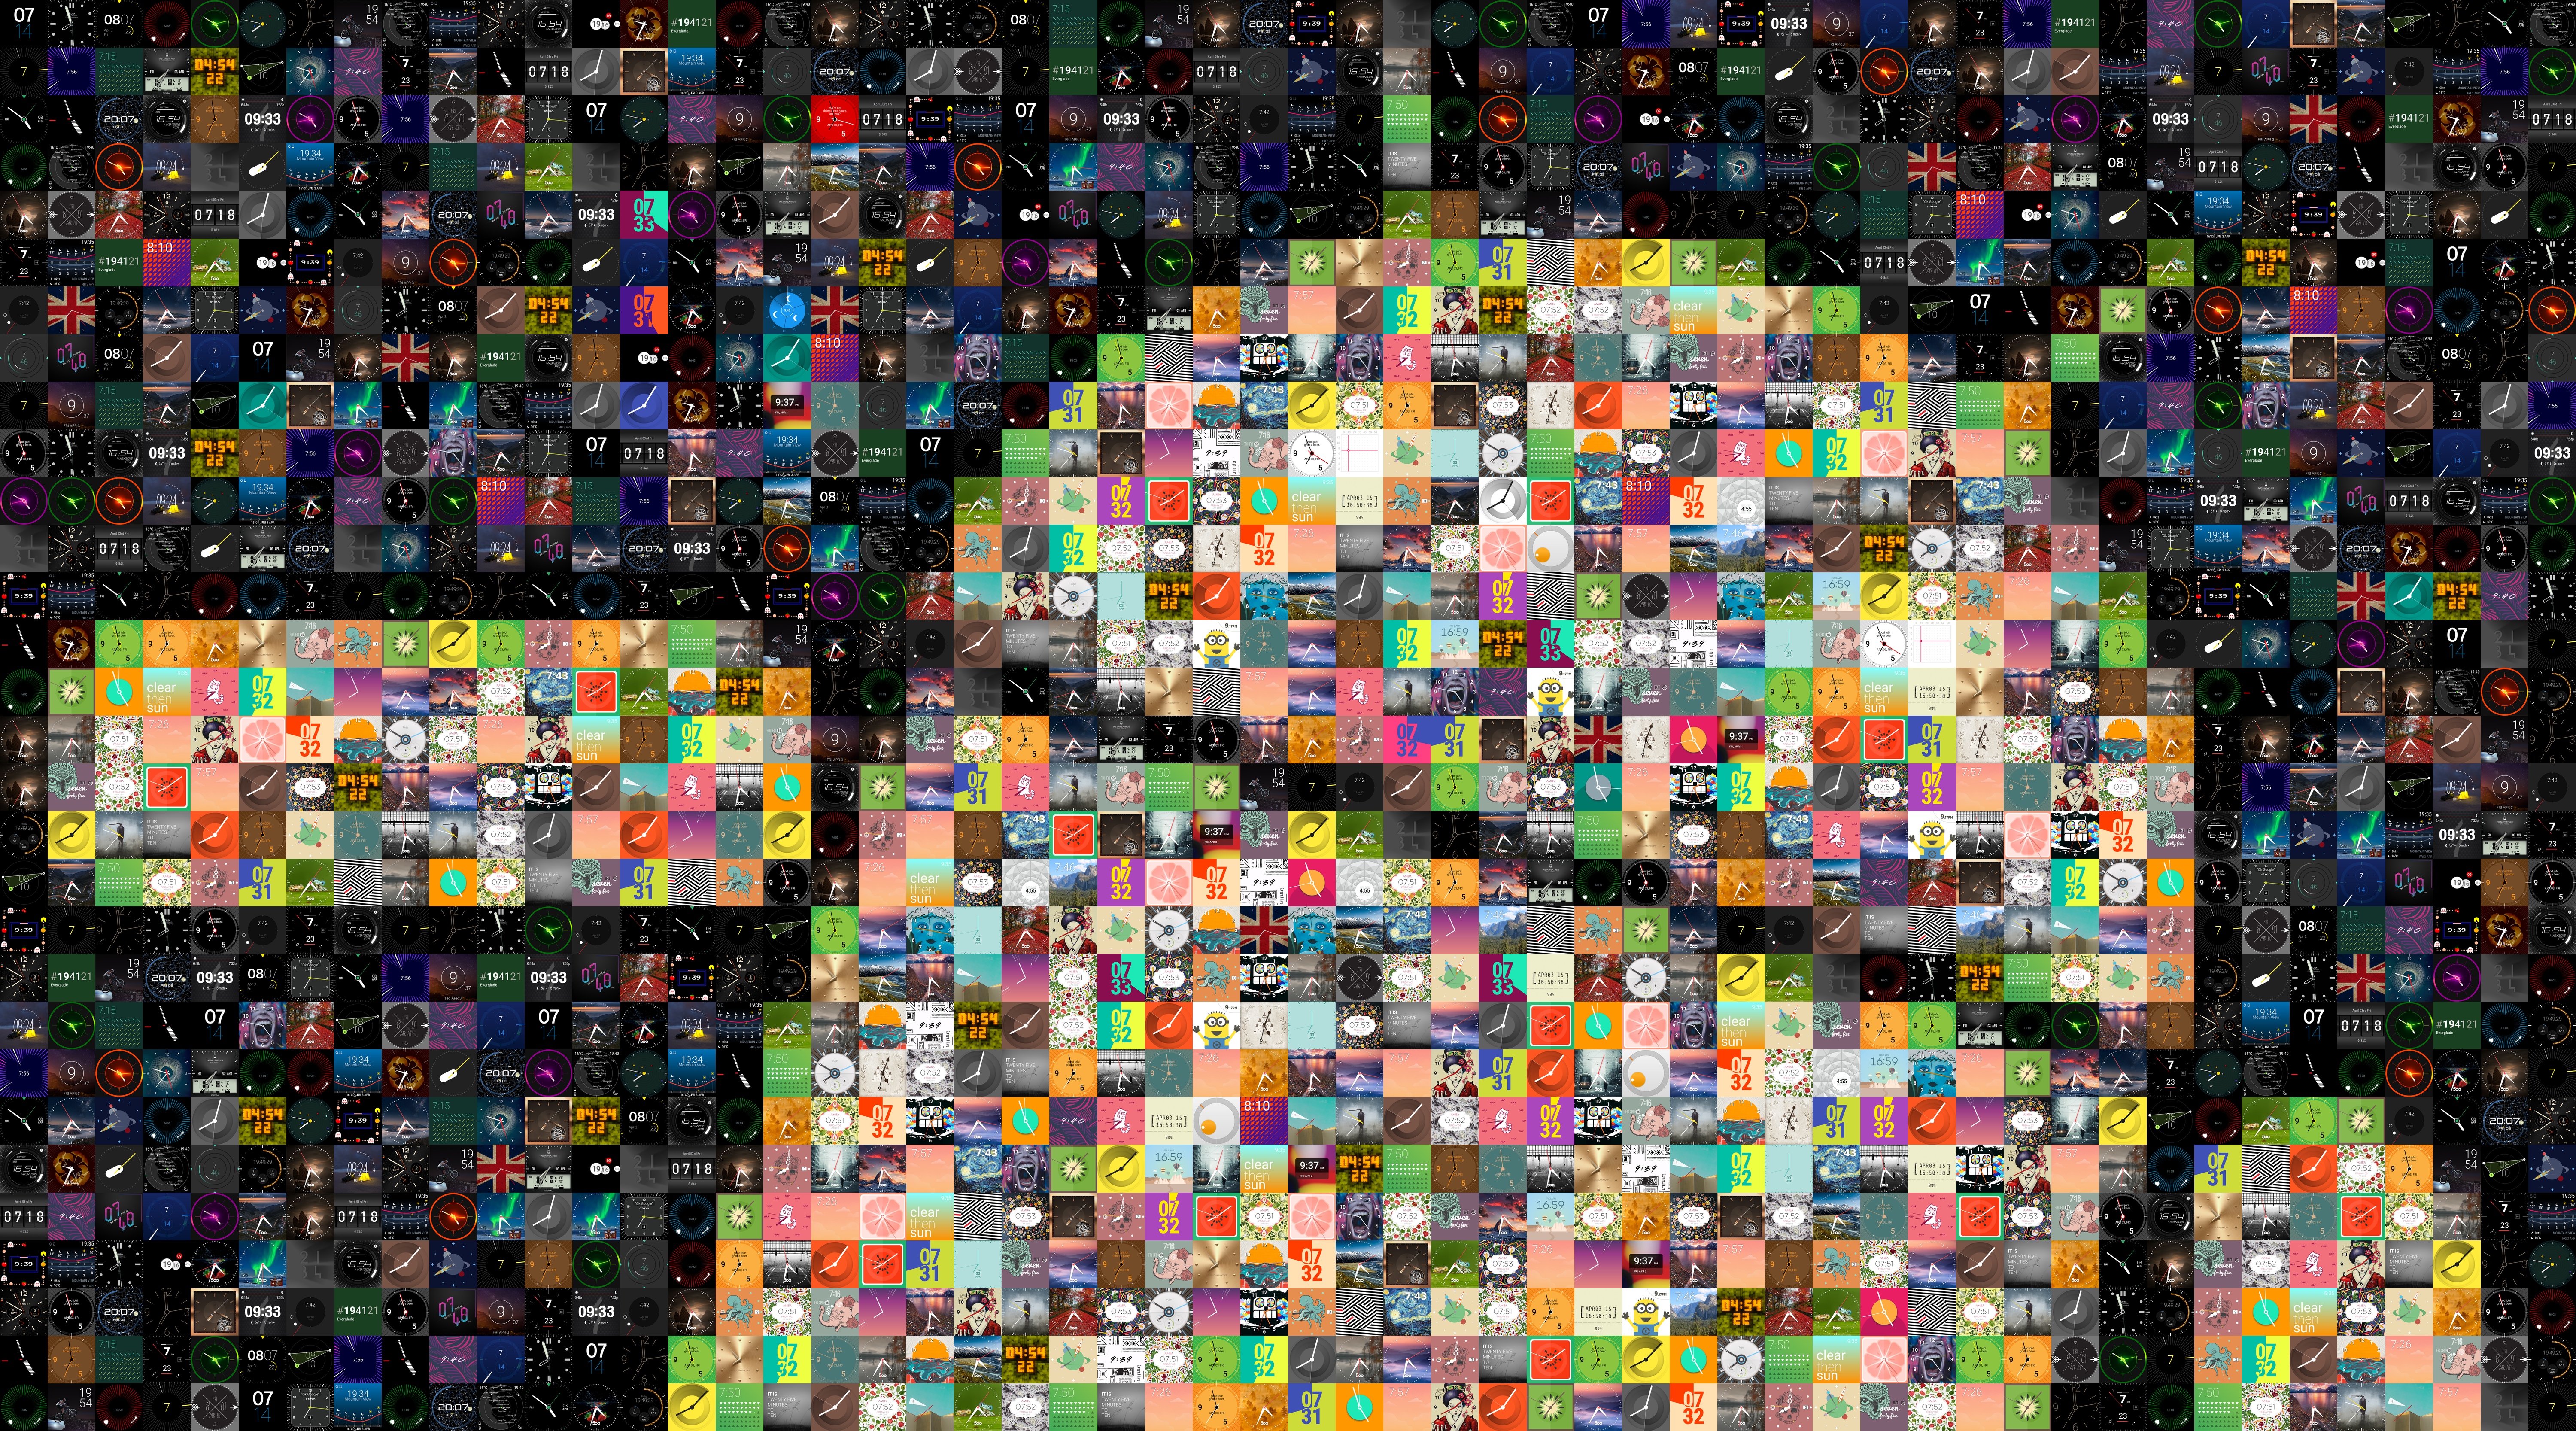 Android Wear mosaic